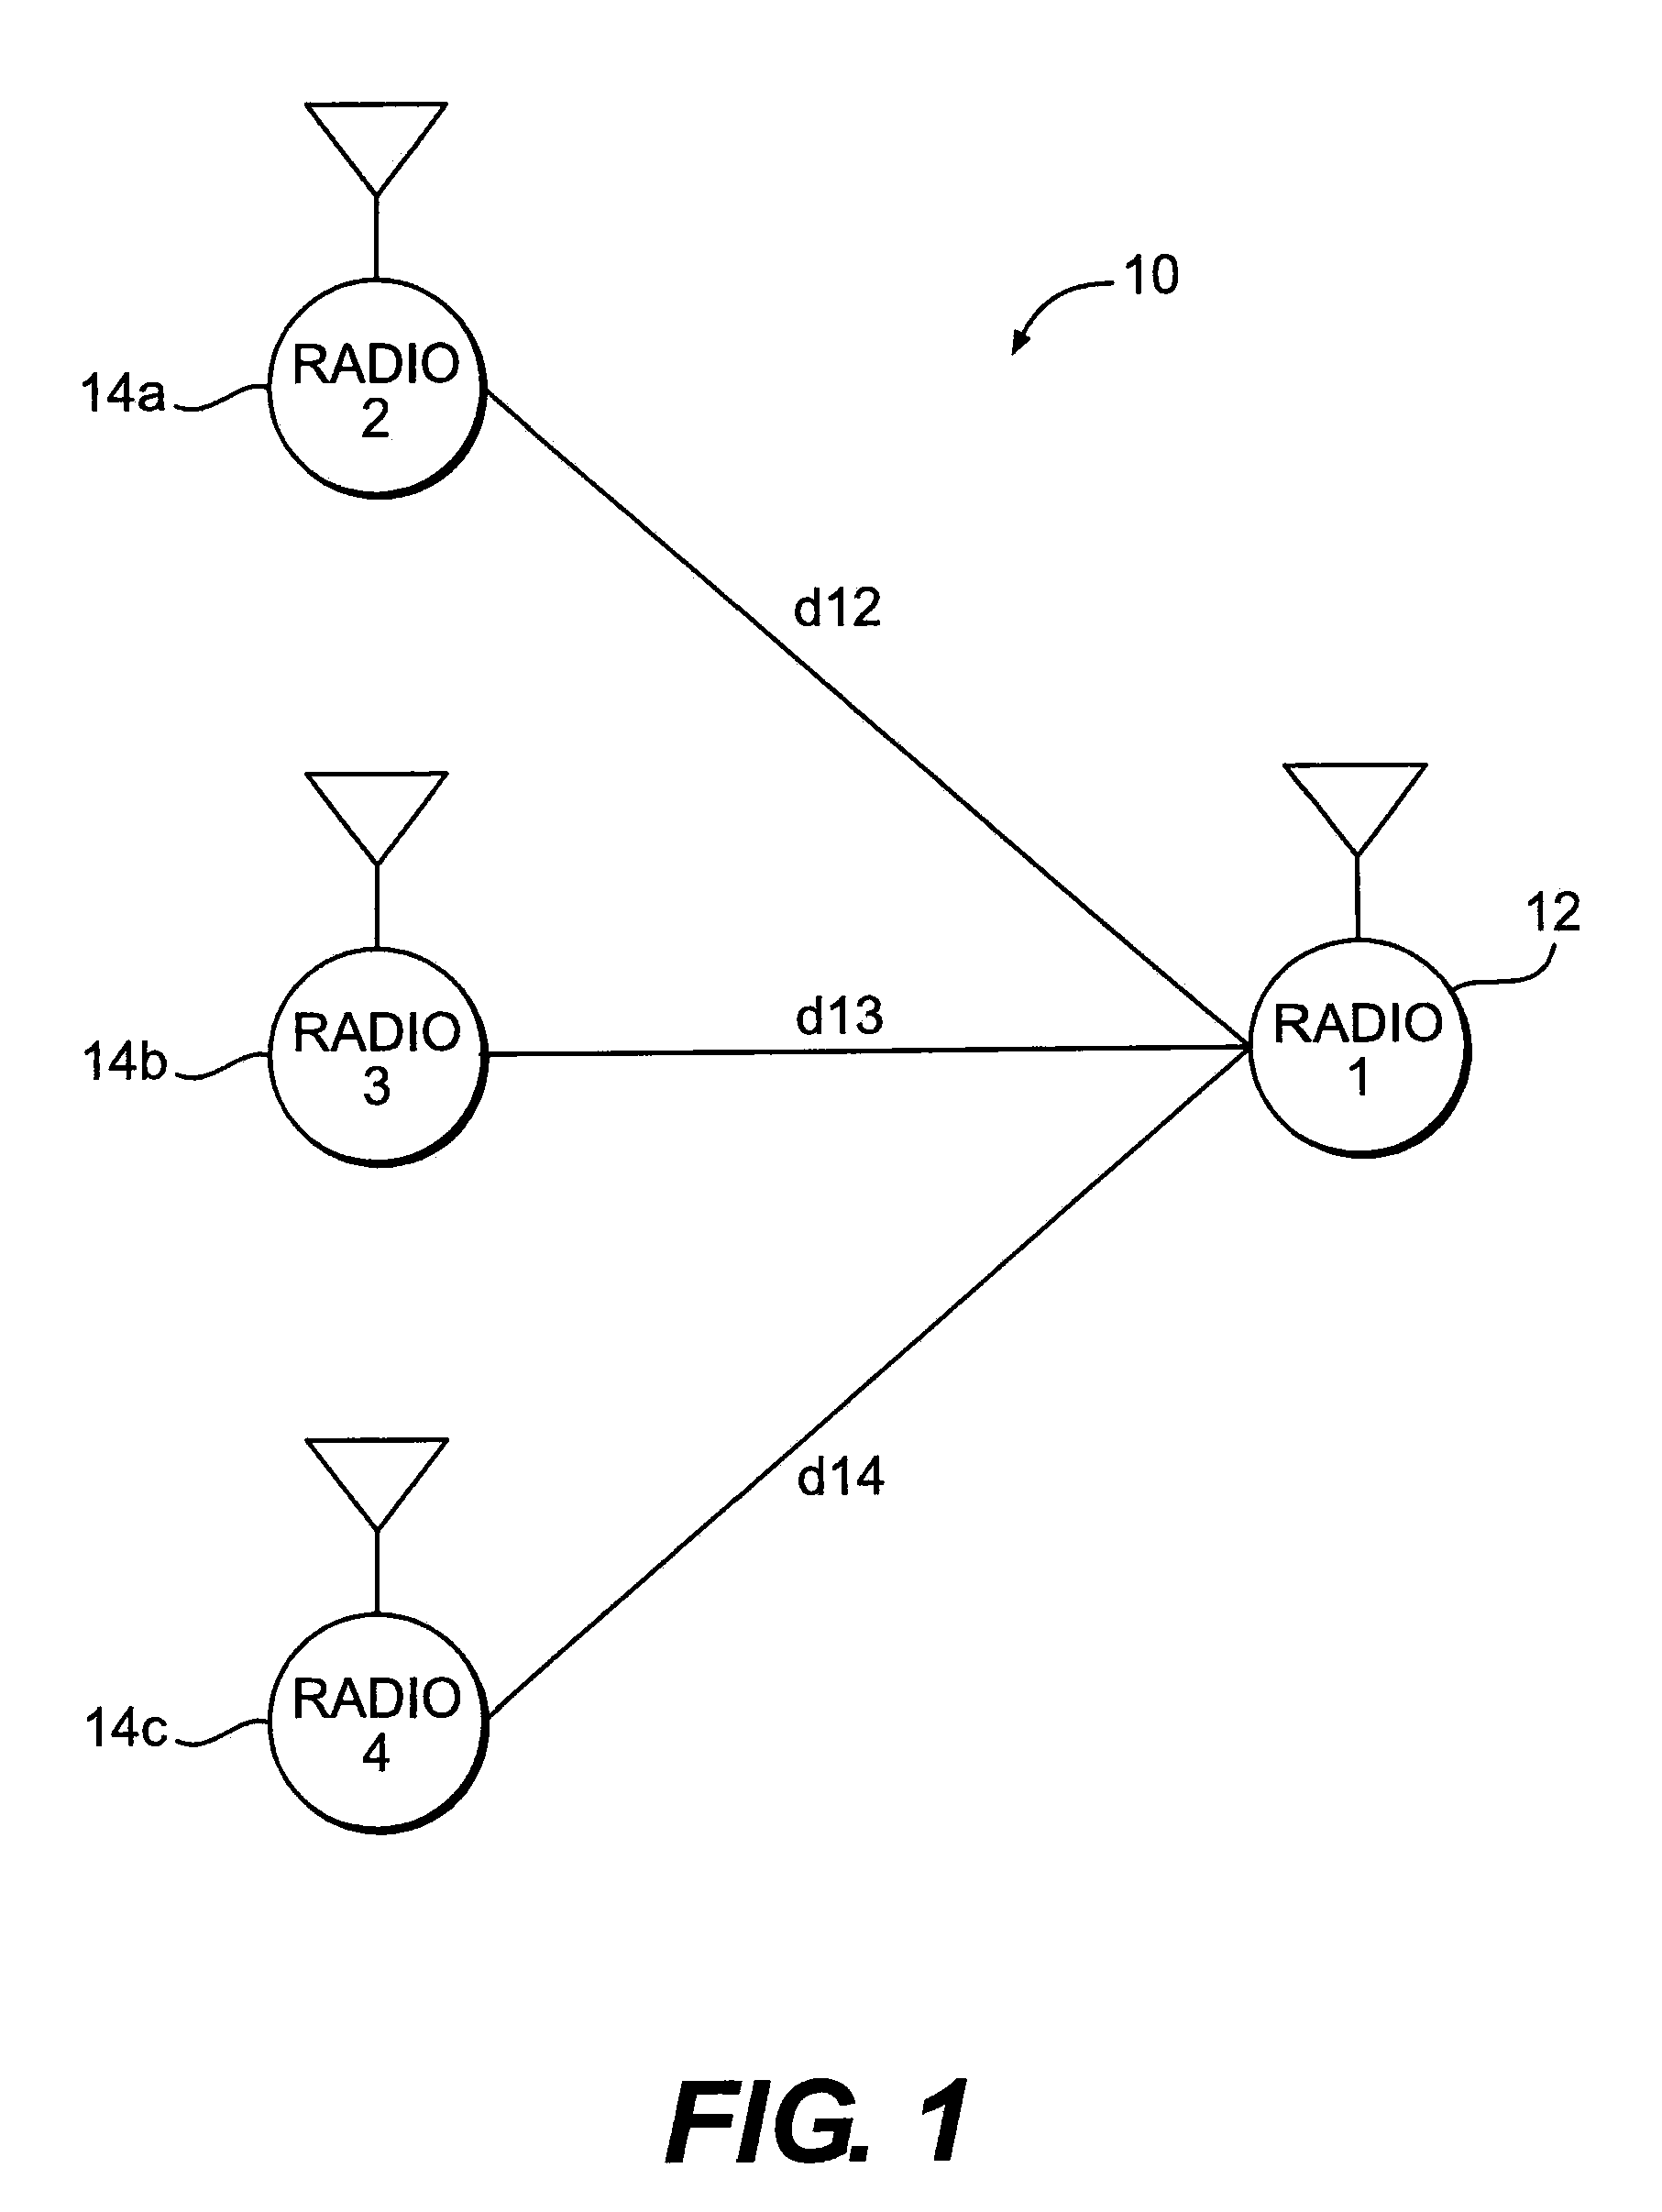 High-Precision Radio Frequency Ranging System